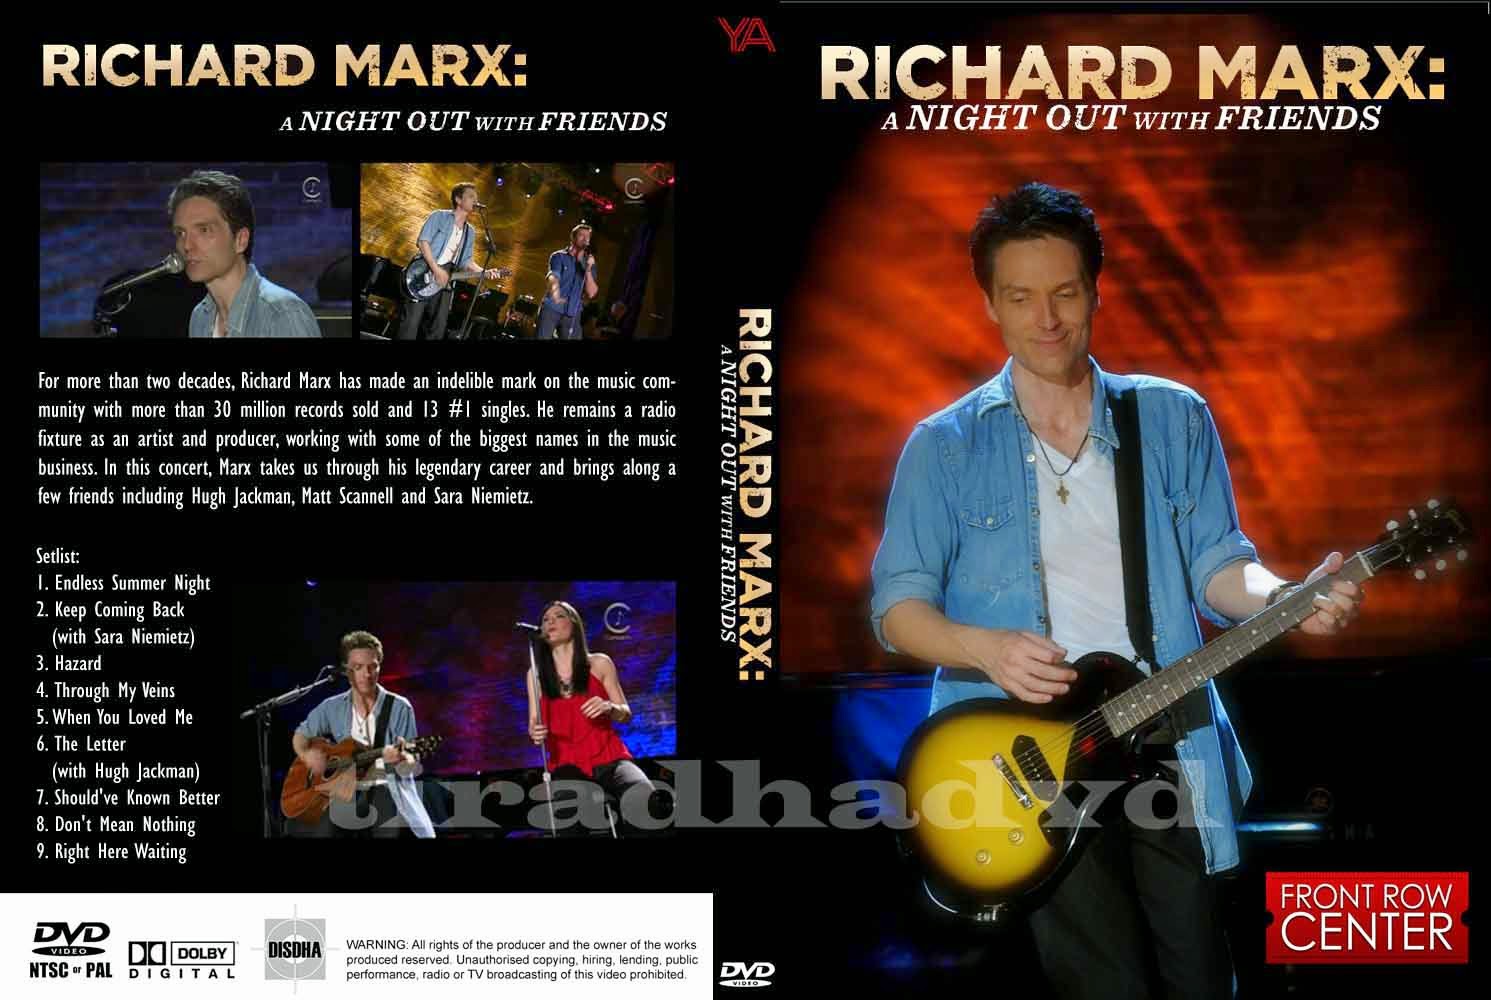 RICHARD MARX A Night Out With Friends (2012)l